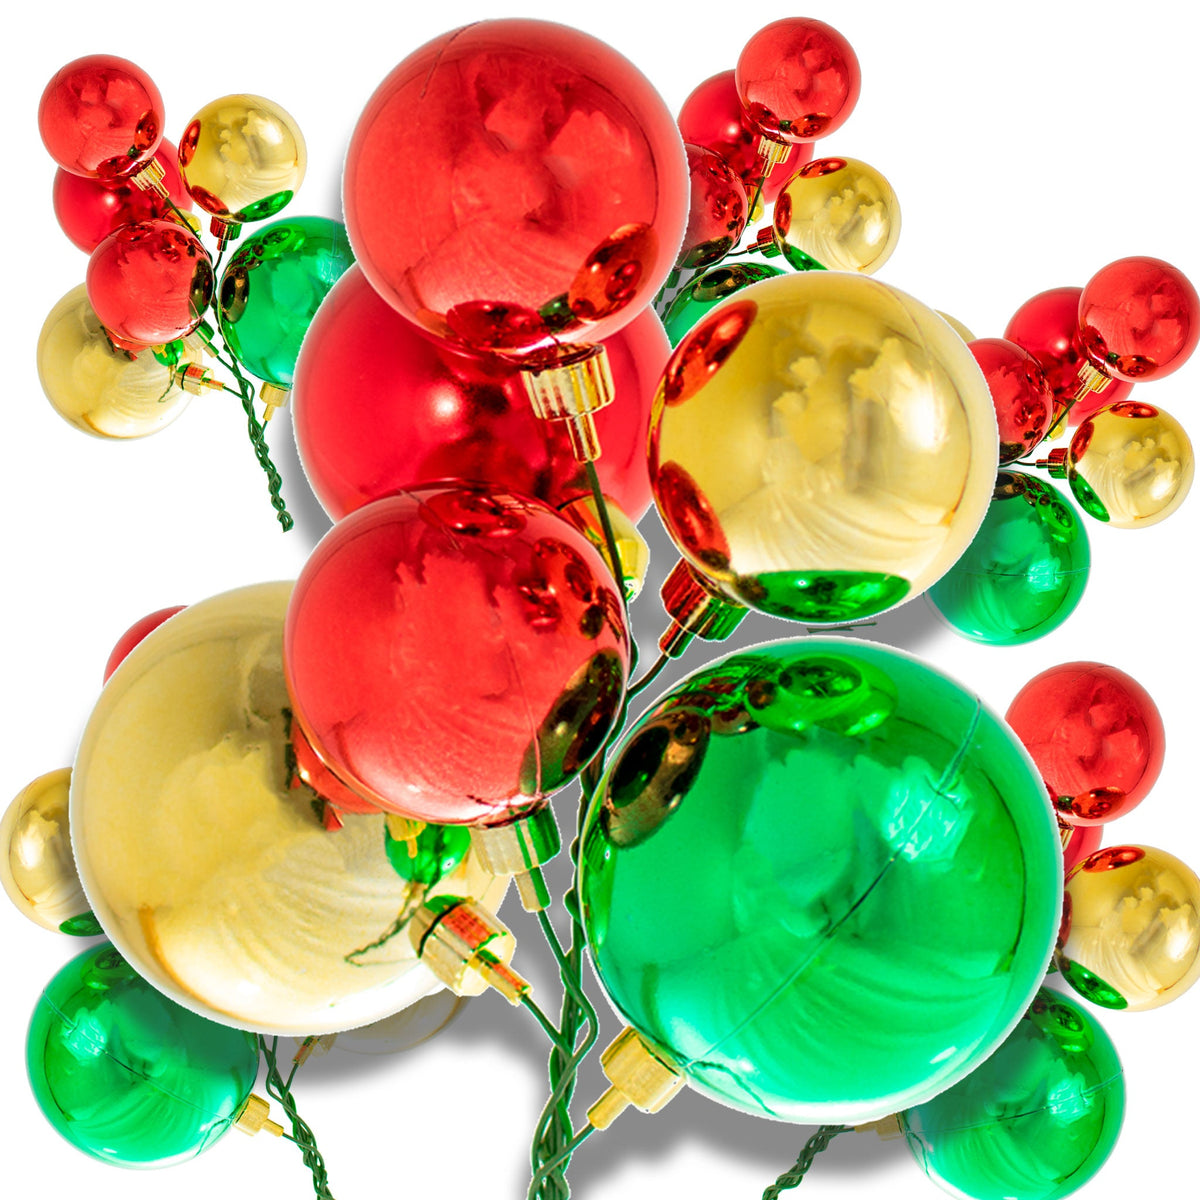 The Classic Christmas Ball Ornament Cluster with Shiny Red, Gold, and Green Ball Ornaments are sold in sets of 6 from leedisplay.com